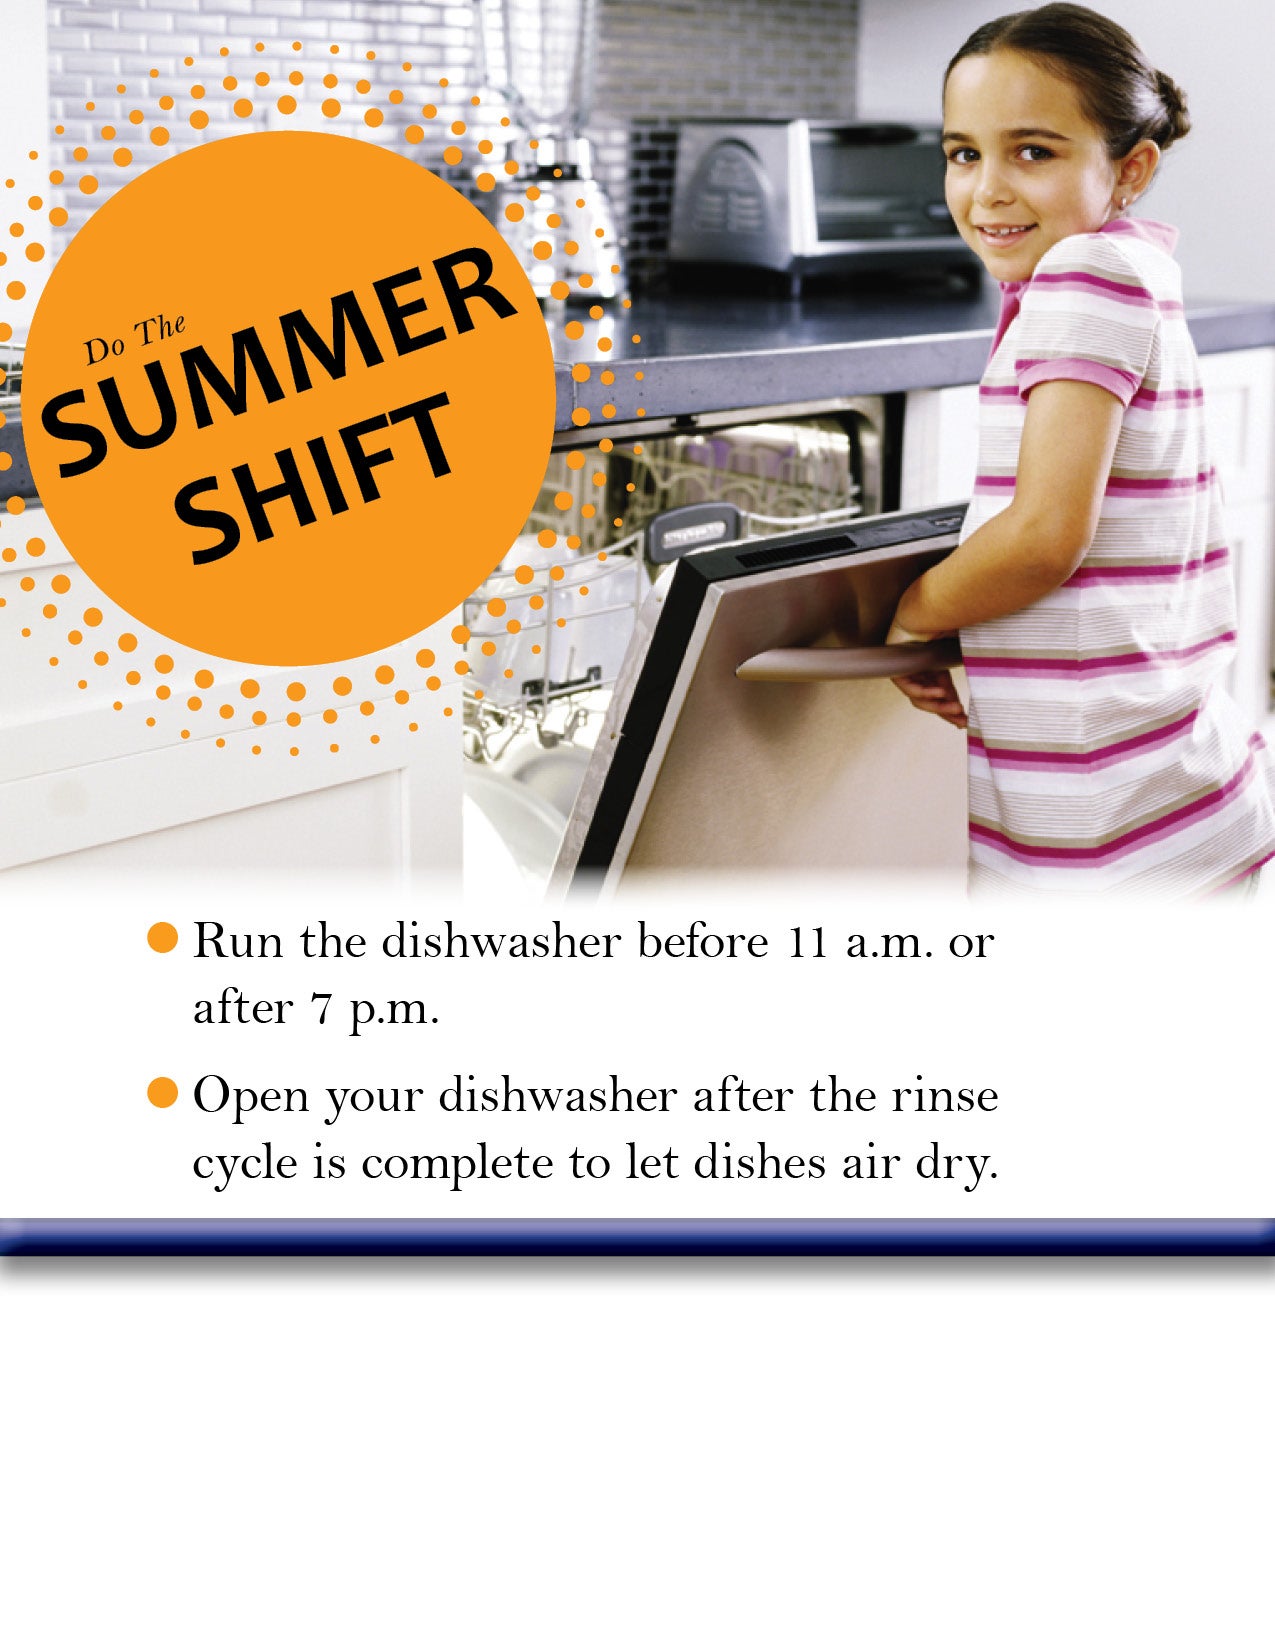 Do the Summer Shift, Wash Dishes Before or After Peak Times, Air Dry